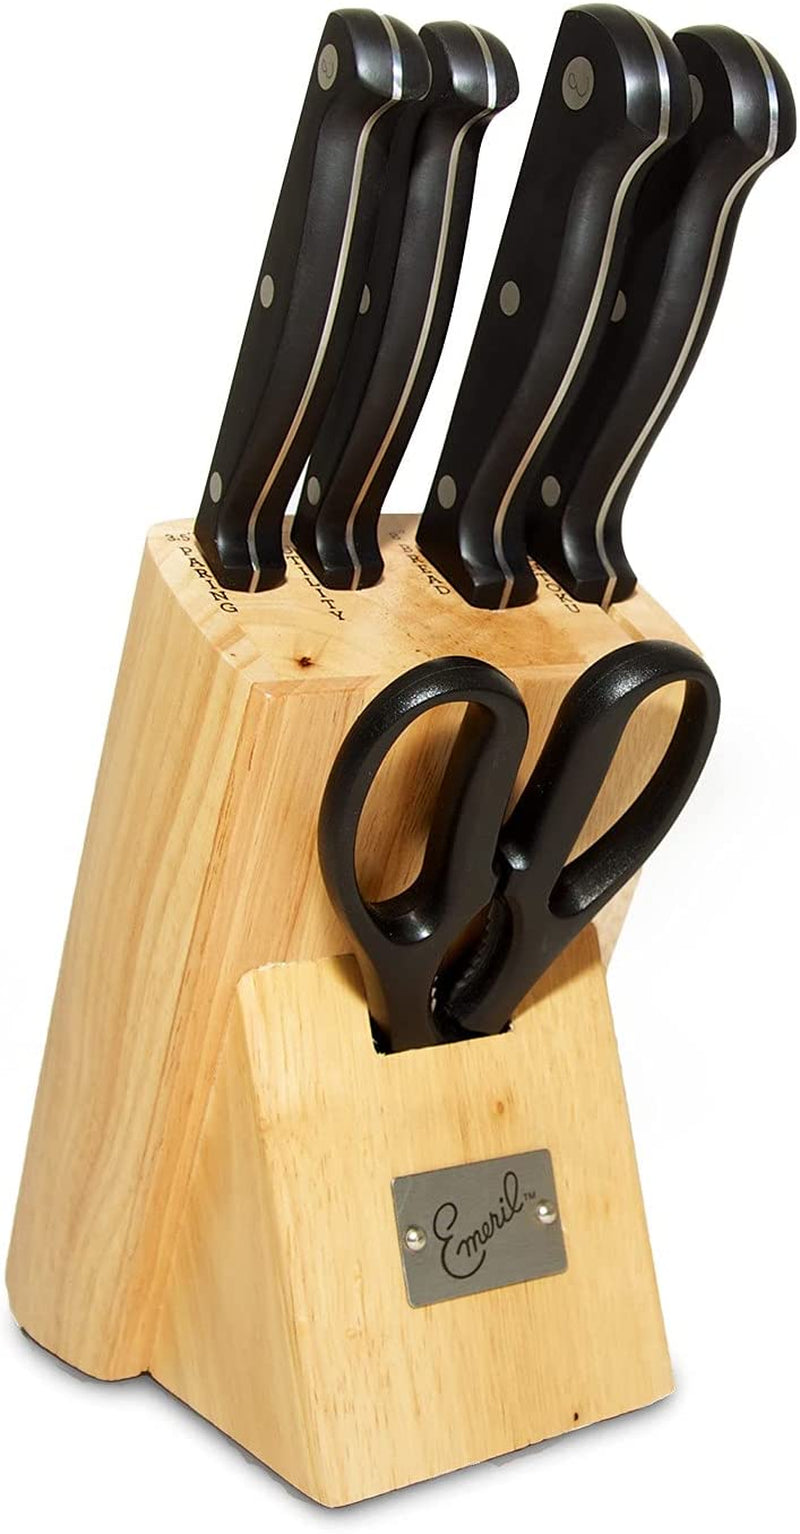 Emeril Lagasse 6-Piece Knife Block Set (Natural) + Tungsten Carbide Knife Sharpener with Suction Pad (Red) - Emeril Cutlery Set with Stamped Blades - Perfect Kitchen Knives for Produce & Sandwiches